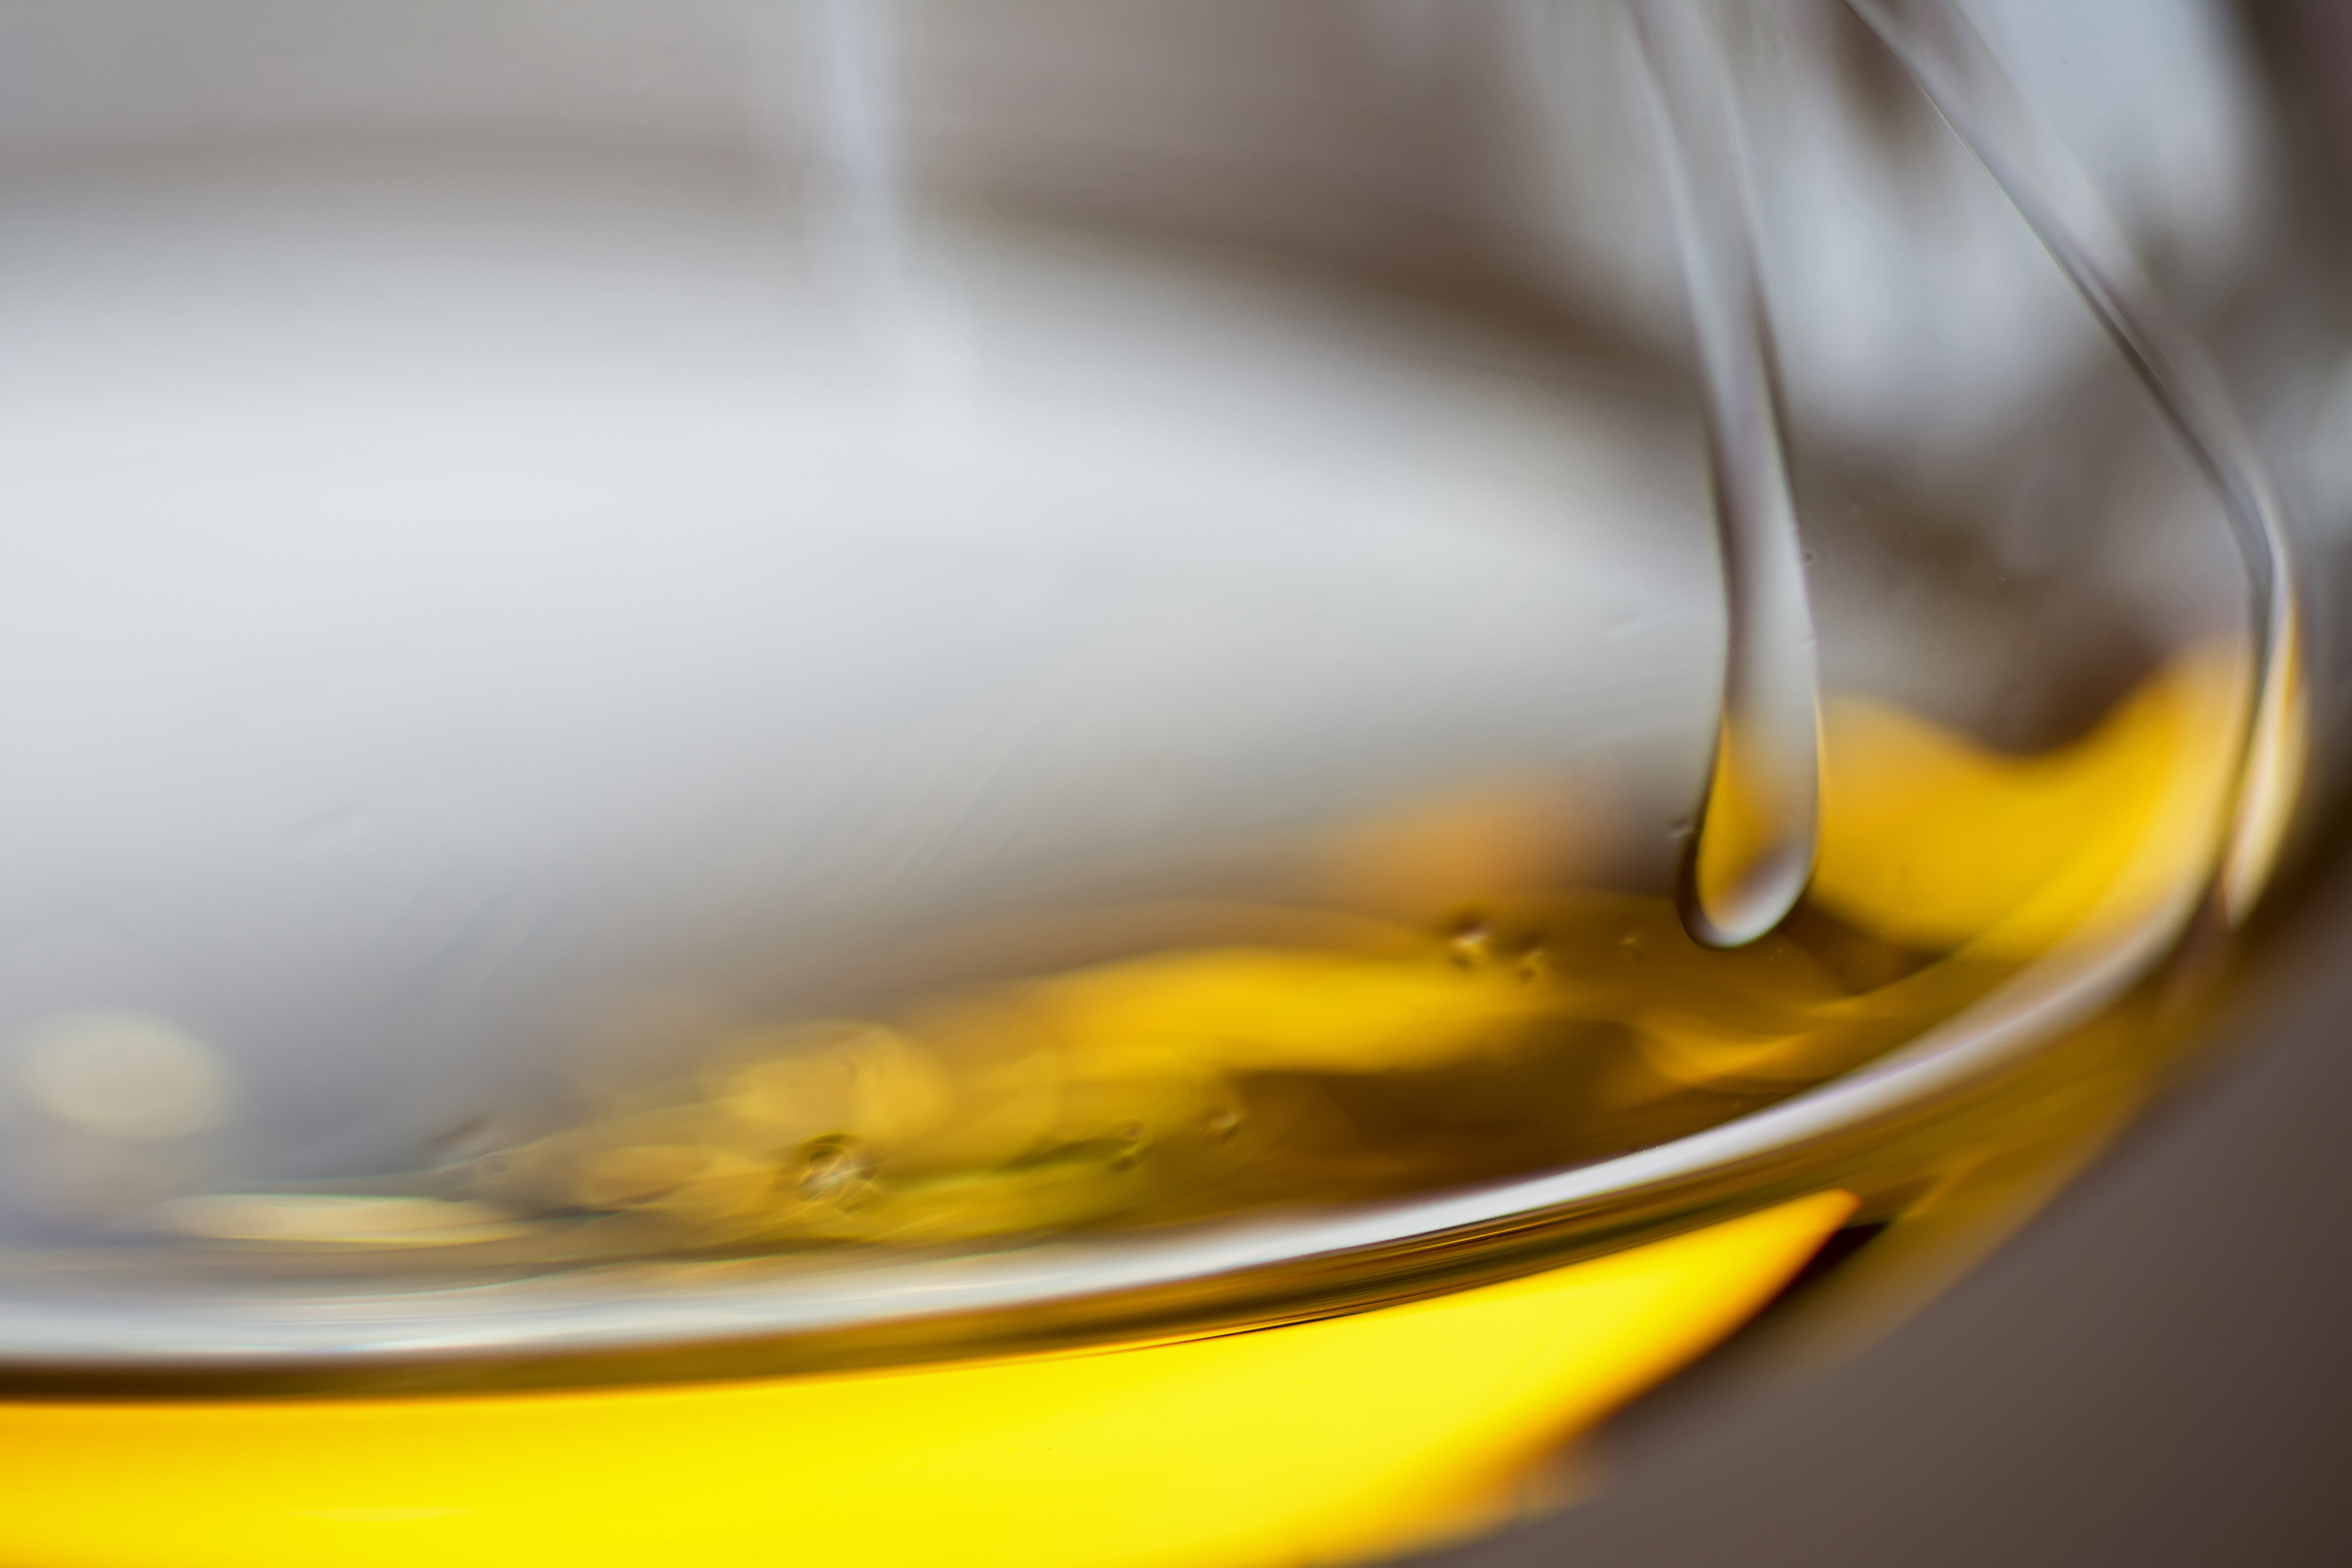 Glass of Fume Blanc wine close up with a golden hue